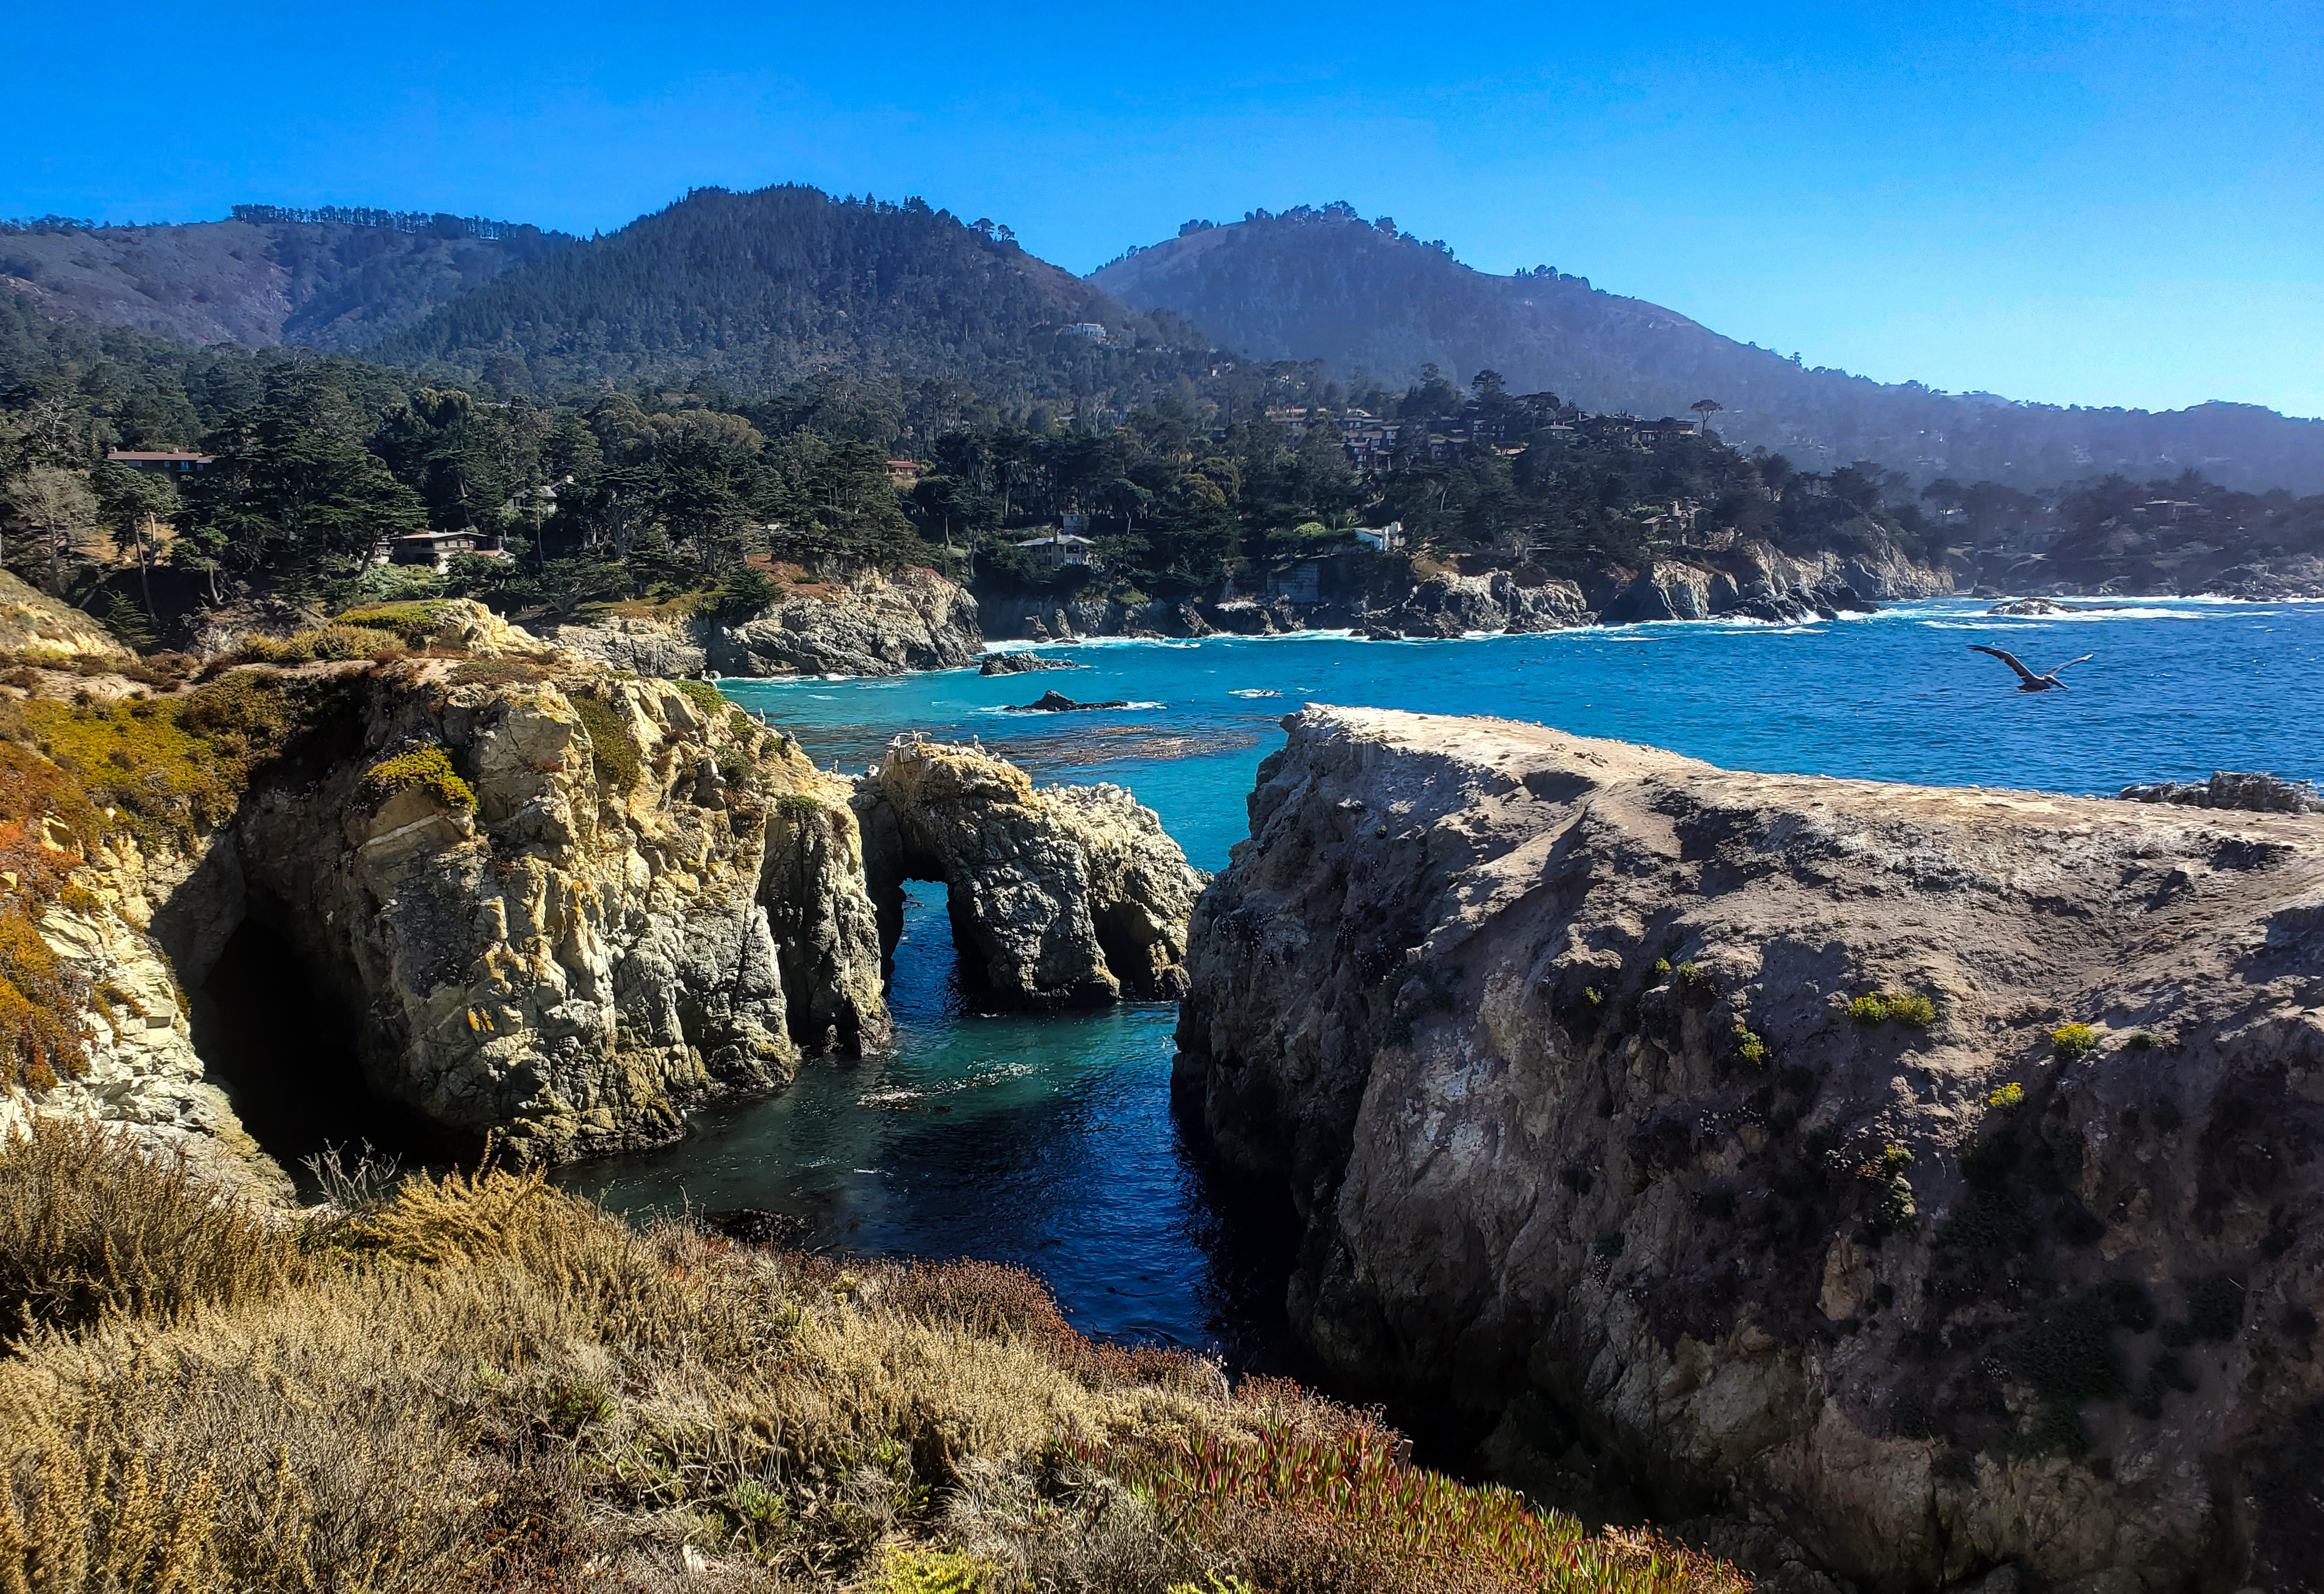 Coastal view with a natural rock arch over ocean waters, surrounded by wooded hills